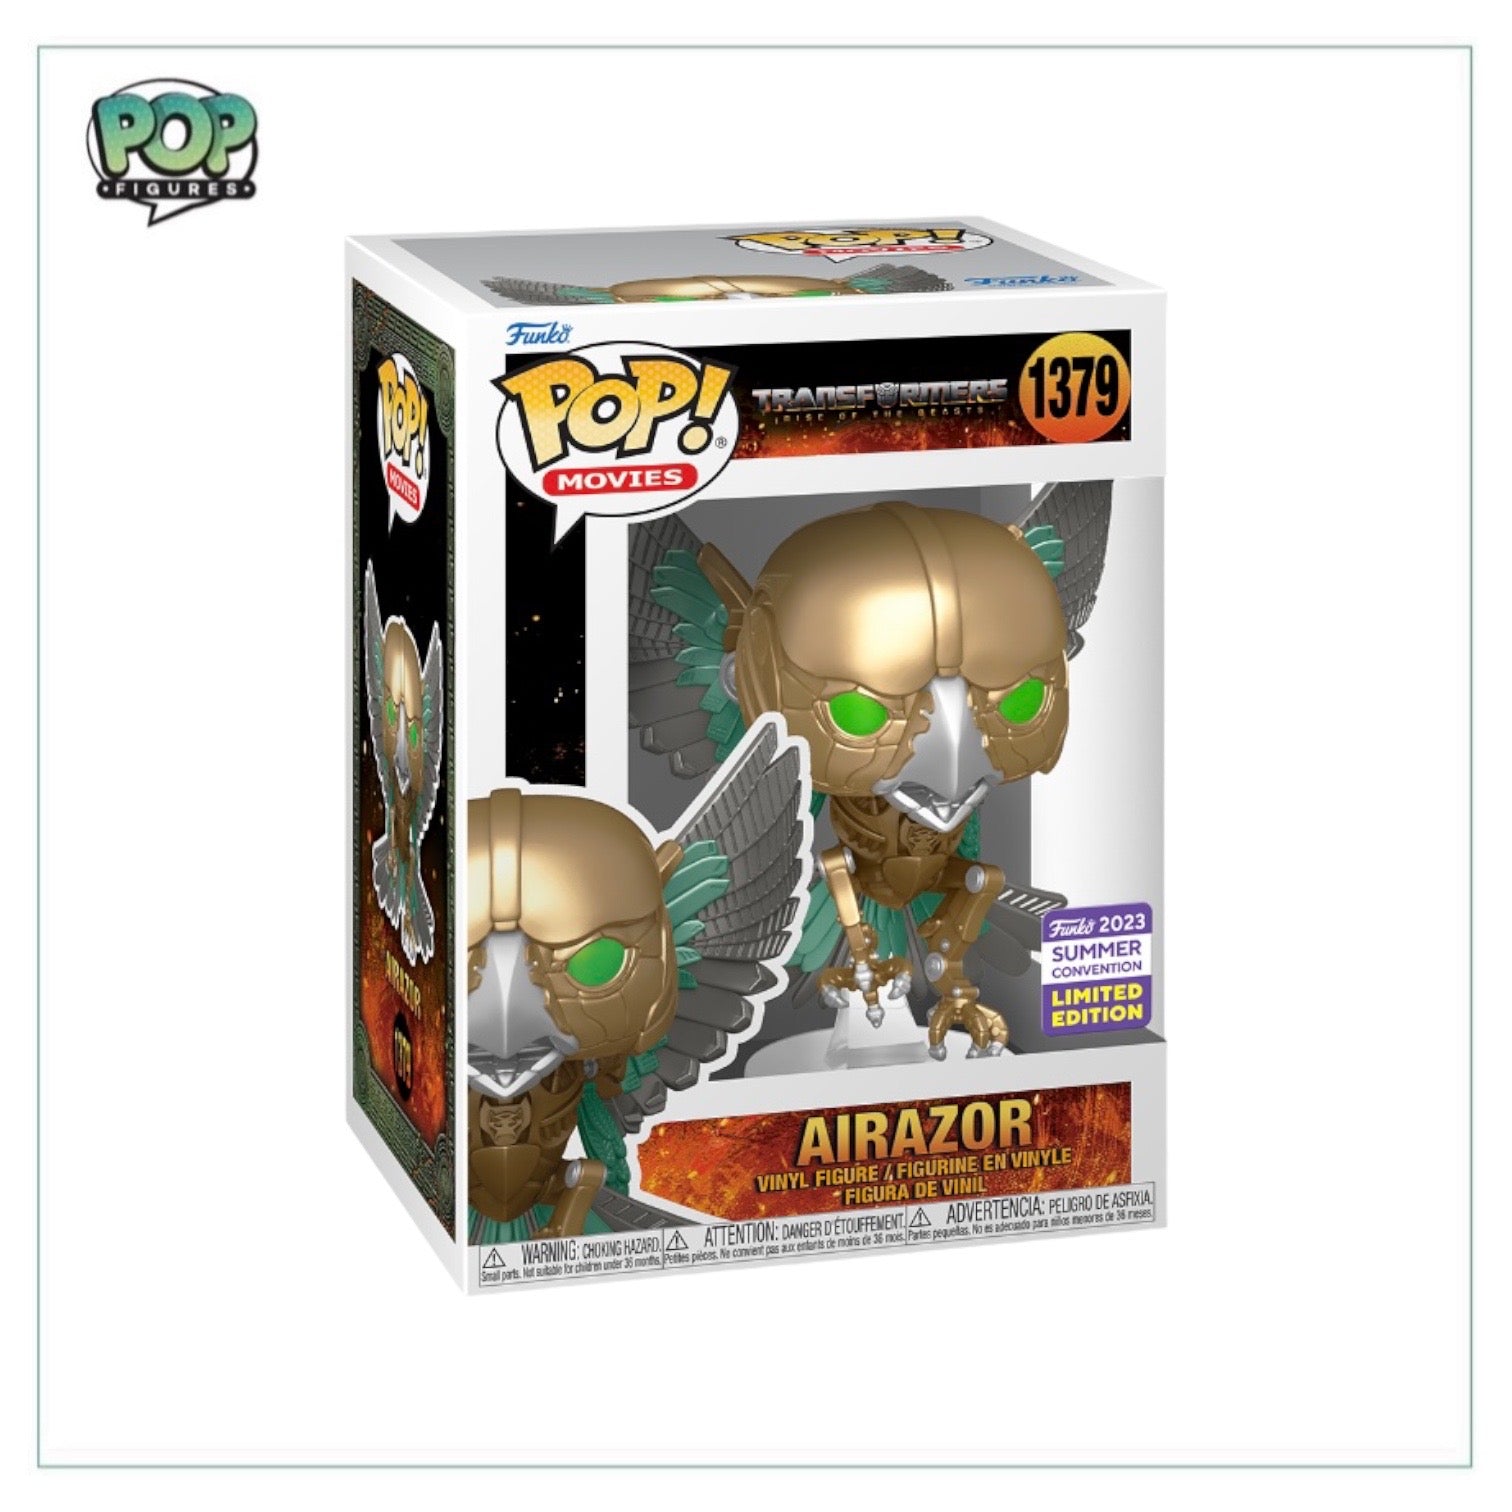 Airazor #1379 Funko Pop! - Transformers Rise of the Beasts - SDCC 2023 Shared Exclusive